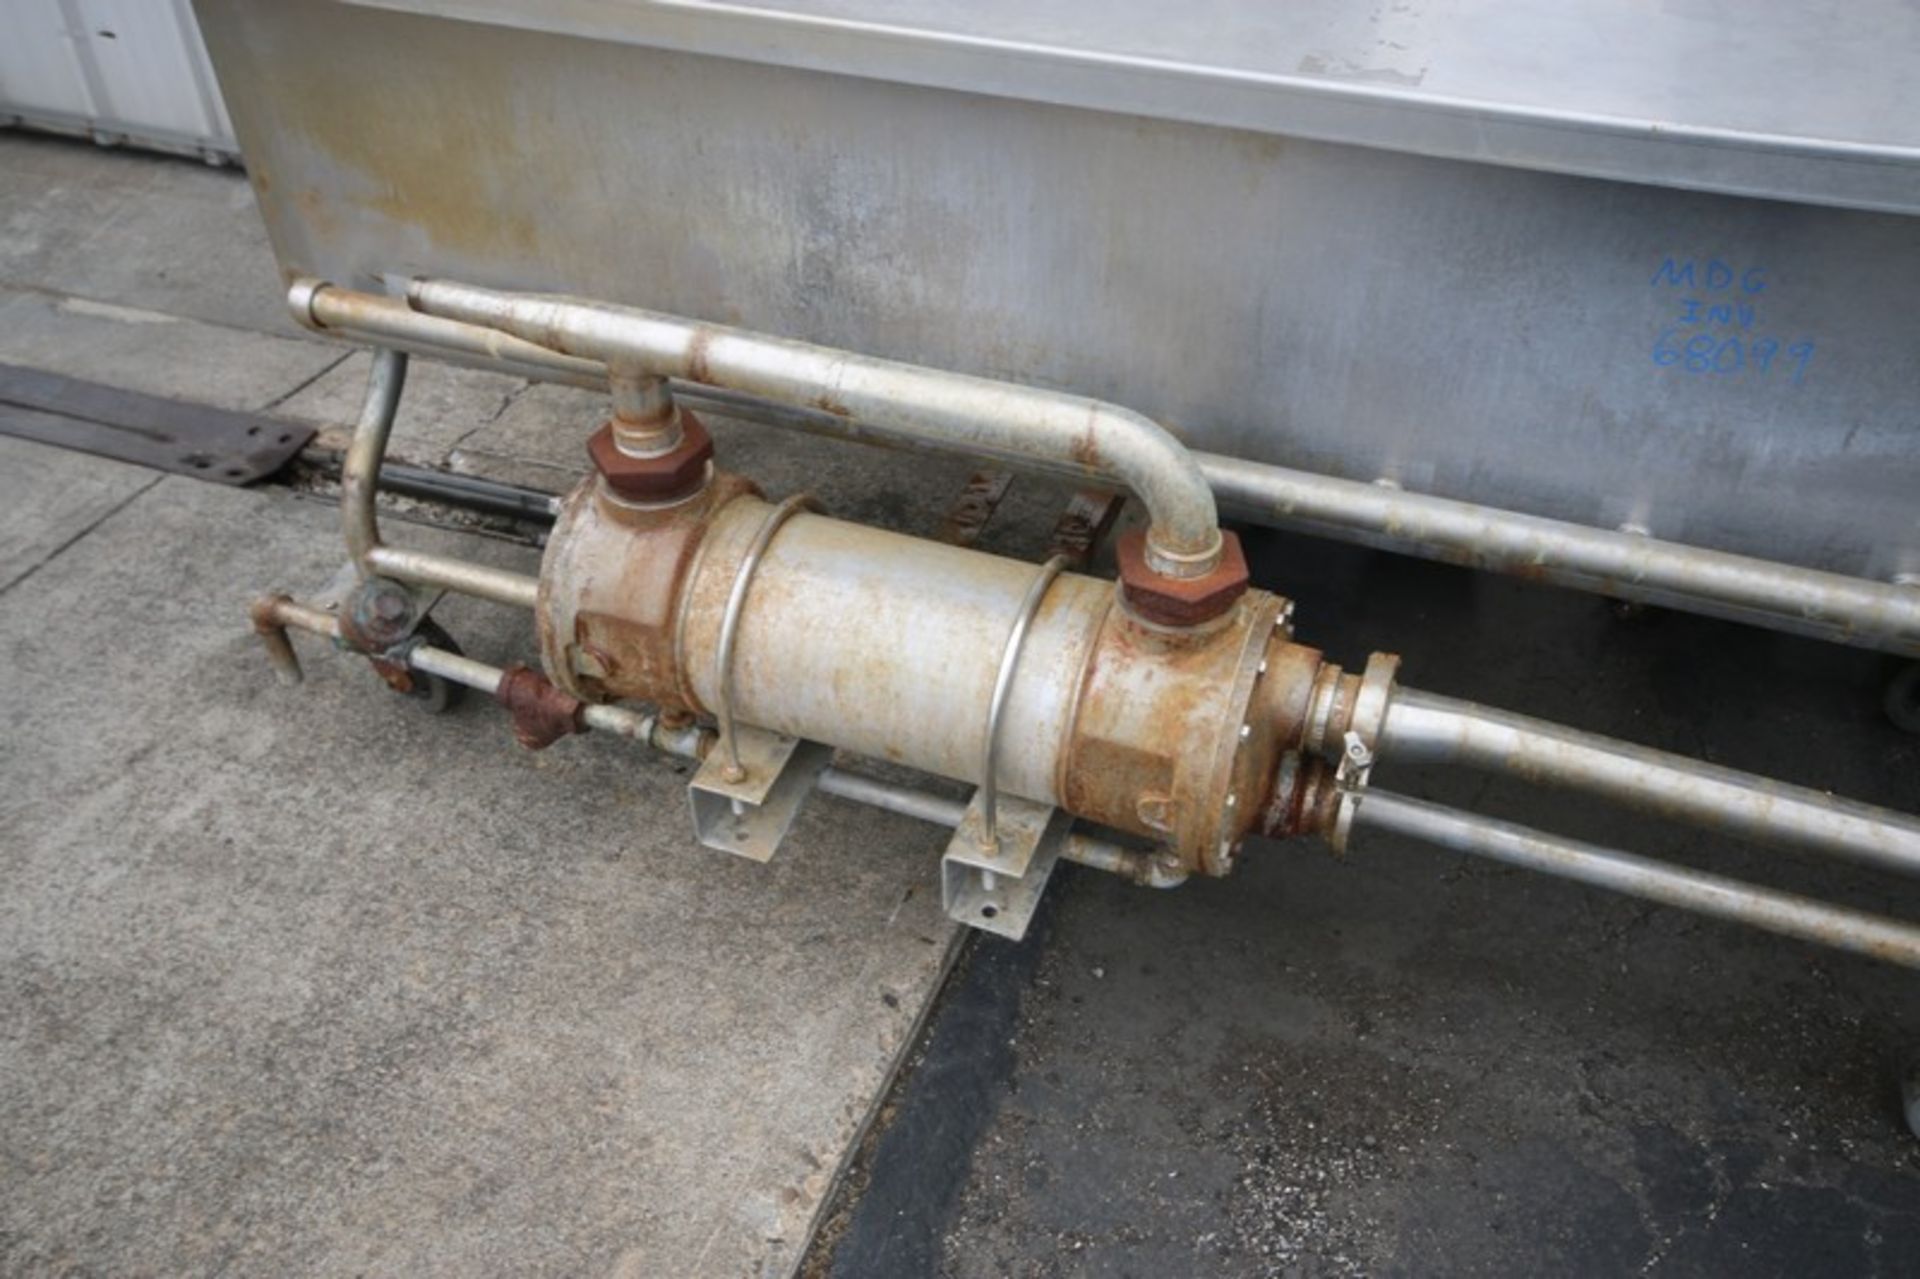 S/S Jet Spray COP Trough, with On Board Heat Exchanger, Overall Dims.: Aprox. 80" L x 38" W x 37" H - Image 3 of 6